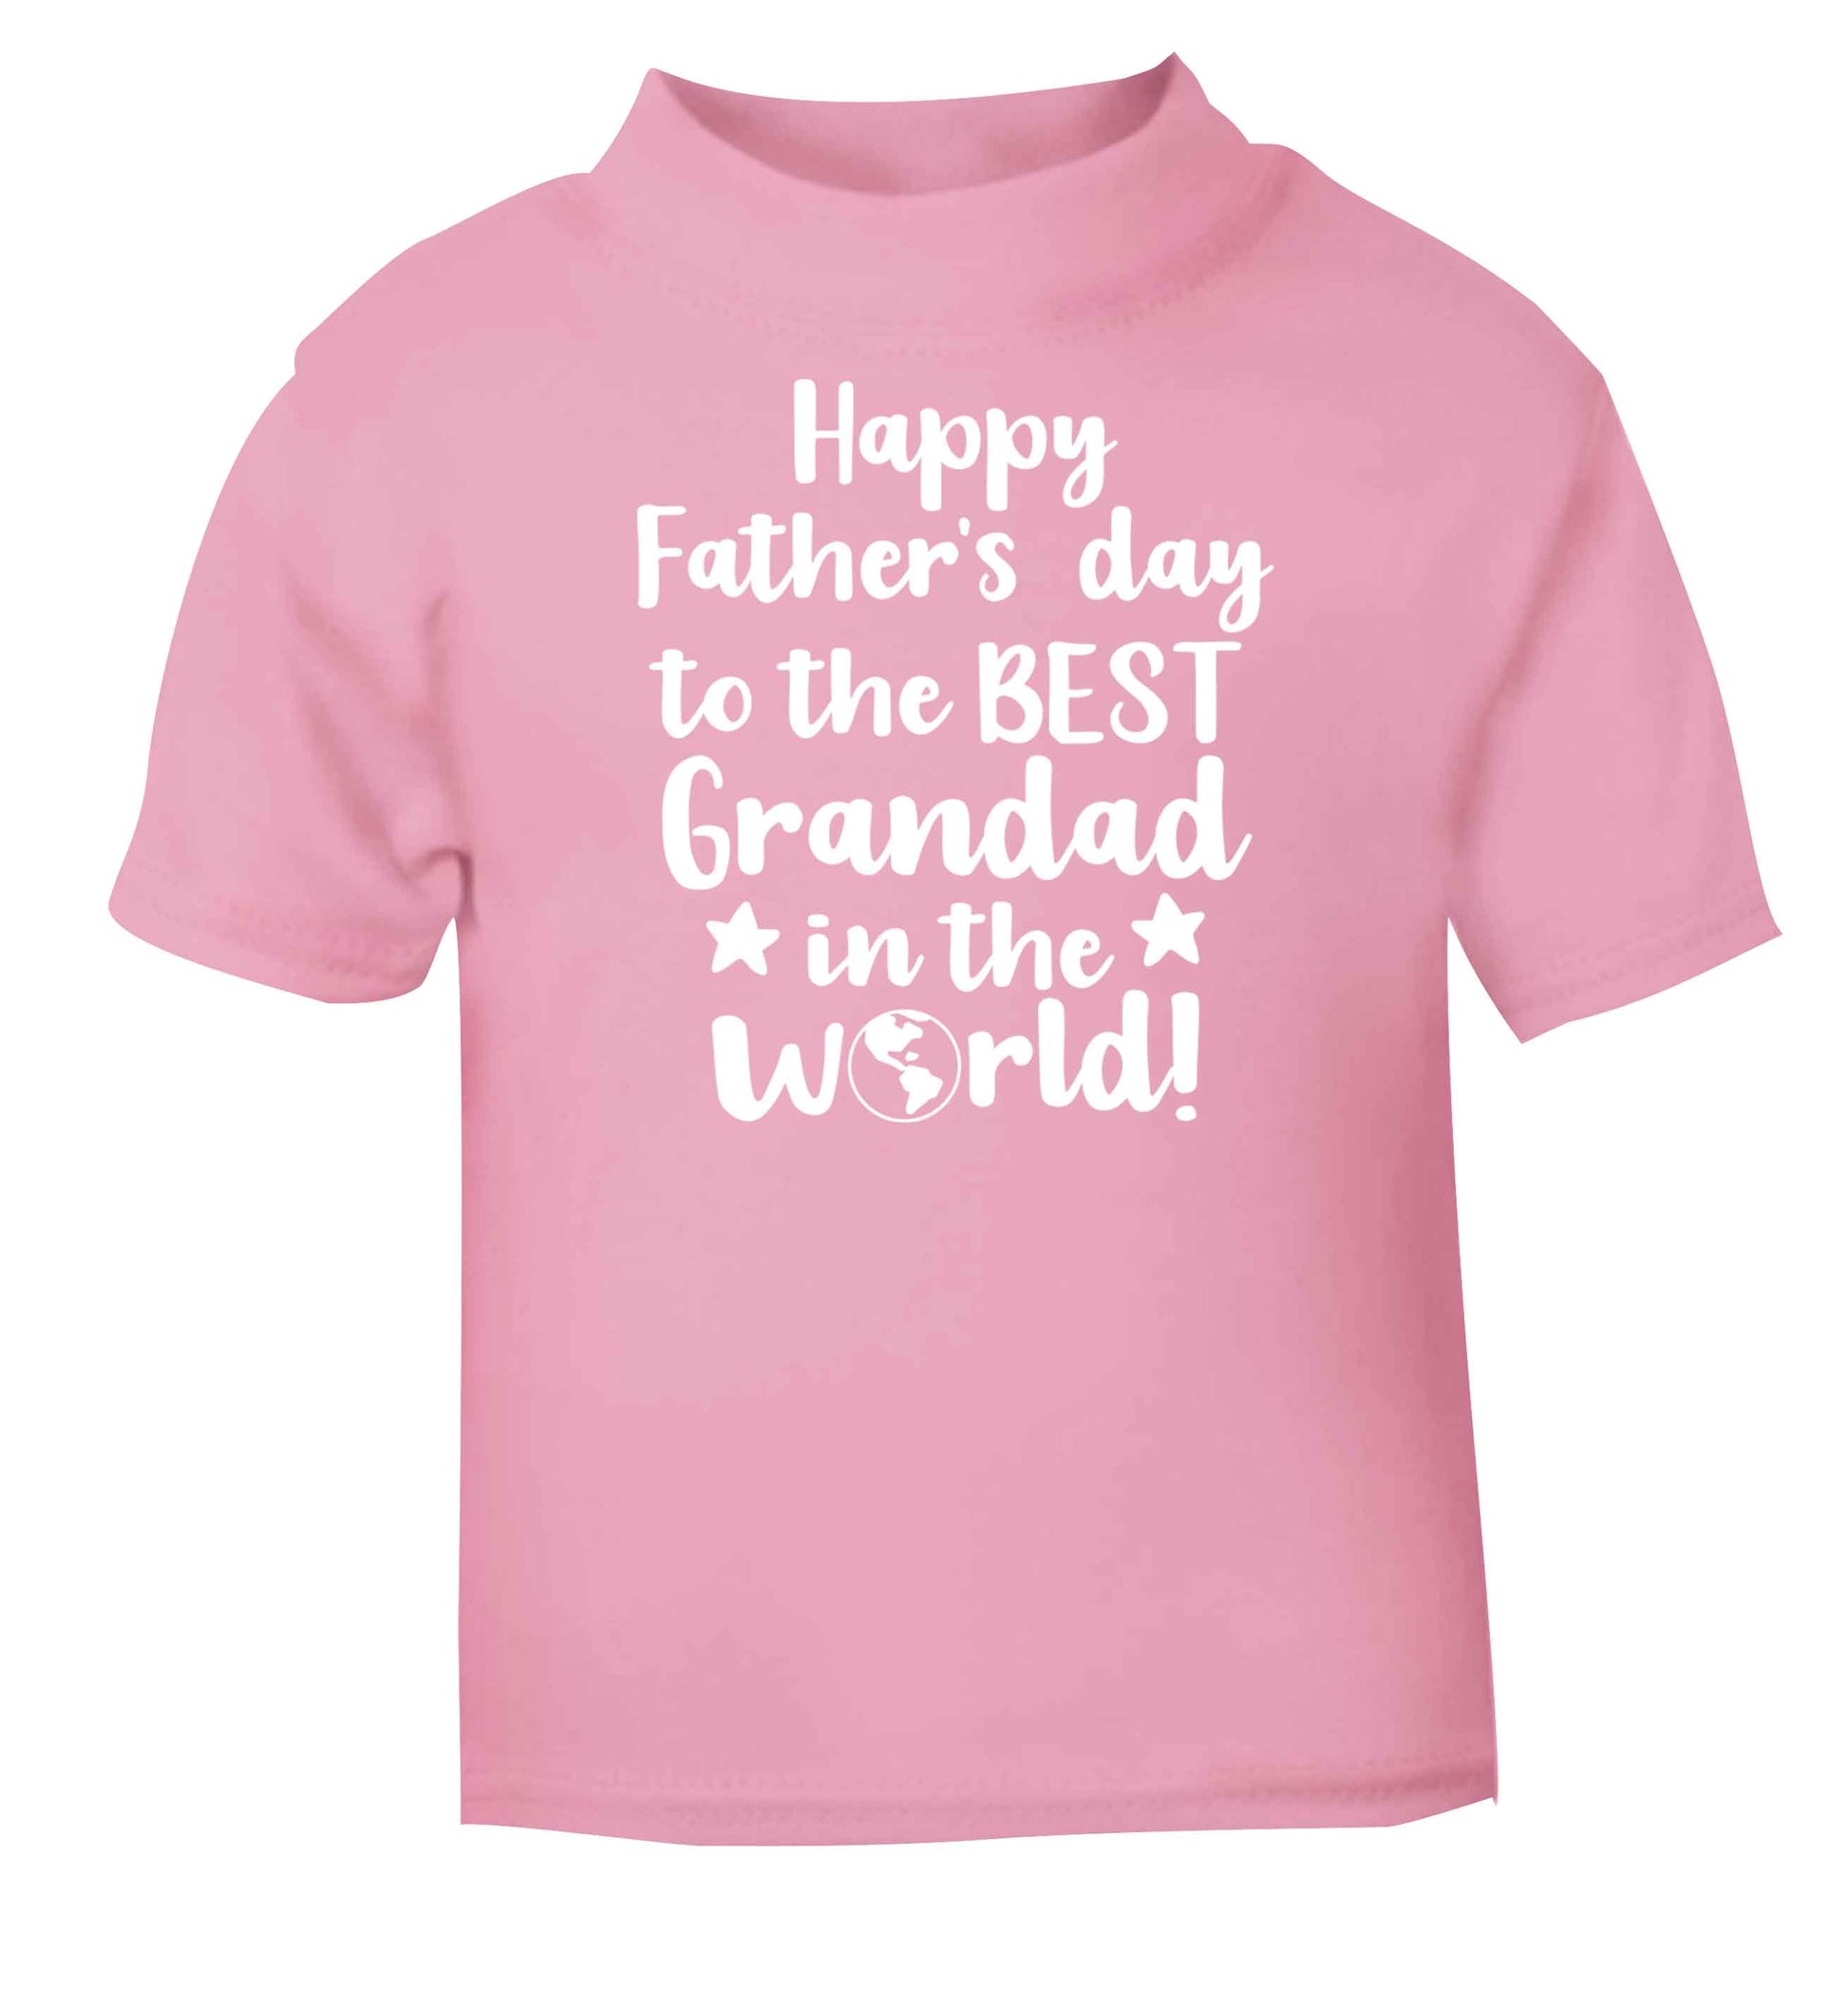 Happy Father's day to the best grandad in the world light pink baby toddler Tshirt 2 Years